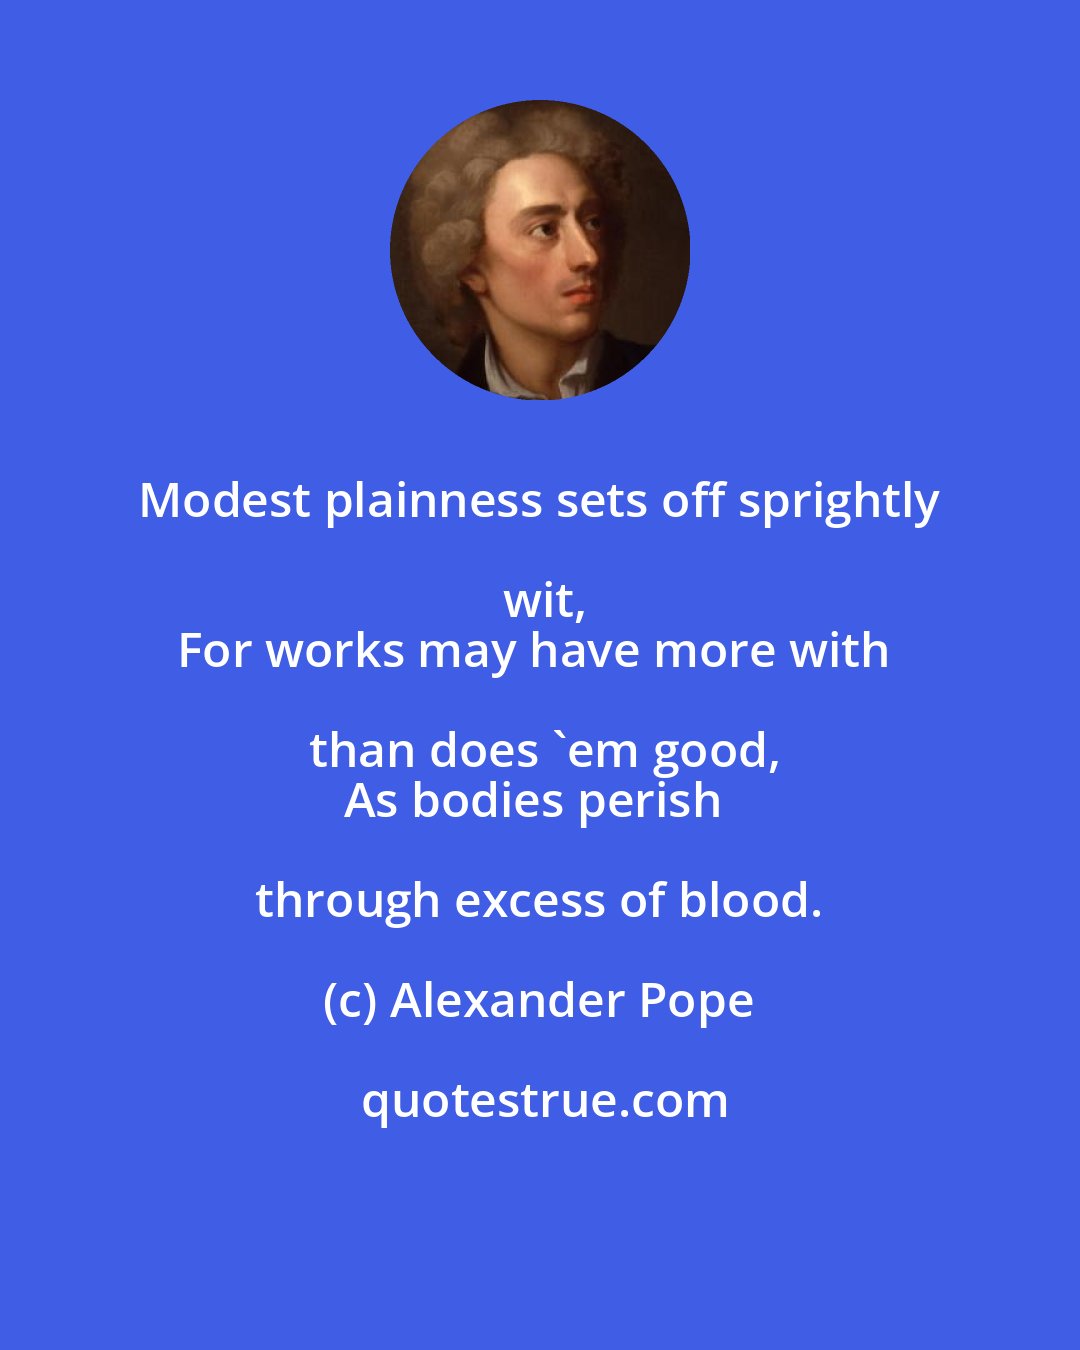 Alexander Pope: Modest plainness sets off sprightly wit,
For works may have more with than does 'em good,
As bodies perish through excess of blood.